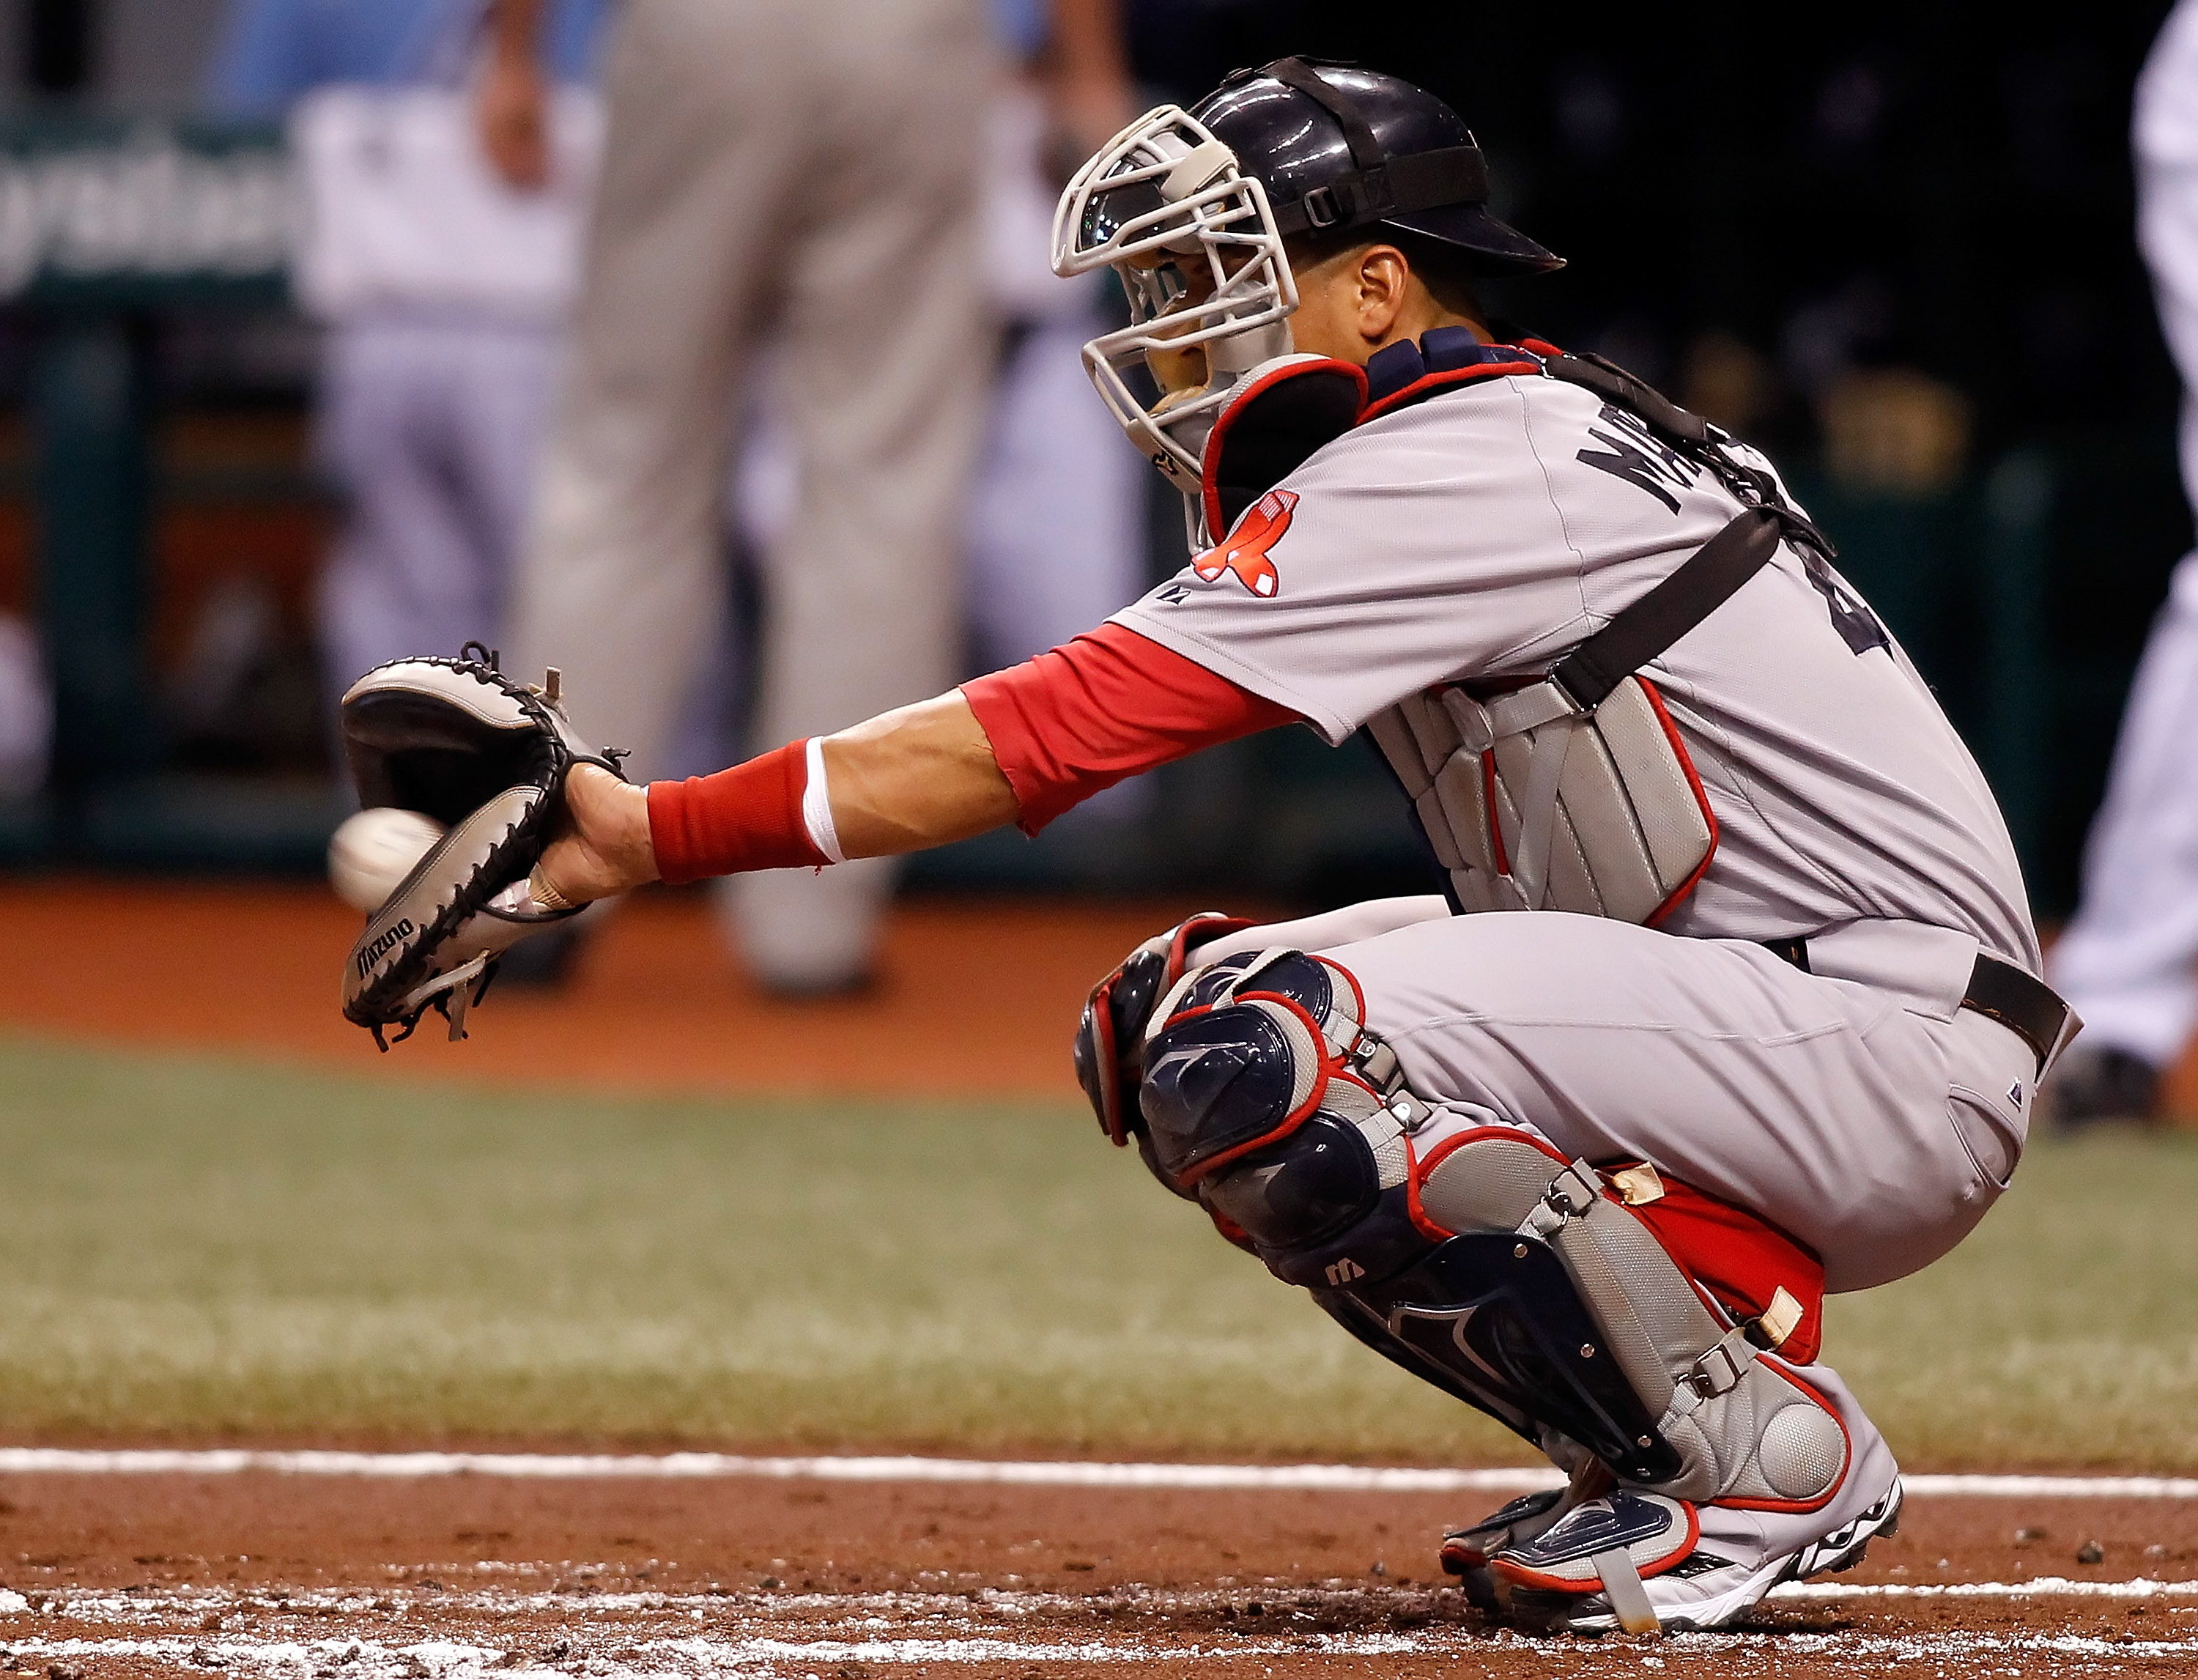 Free agent catcher Victor Martinez leaves Red Sox, agrees to deal